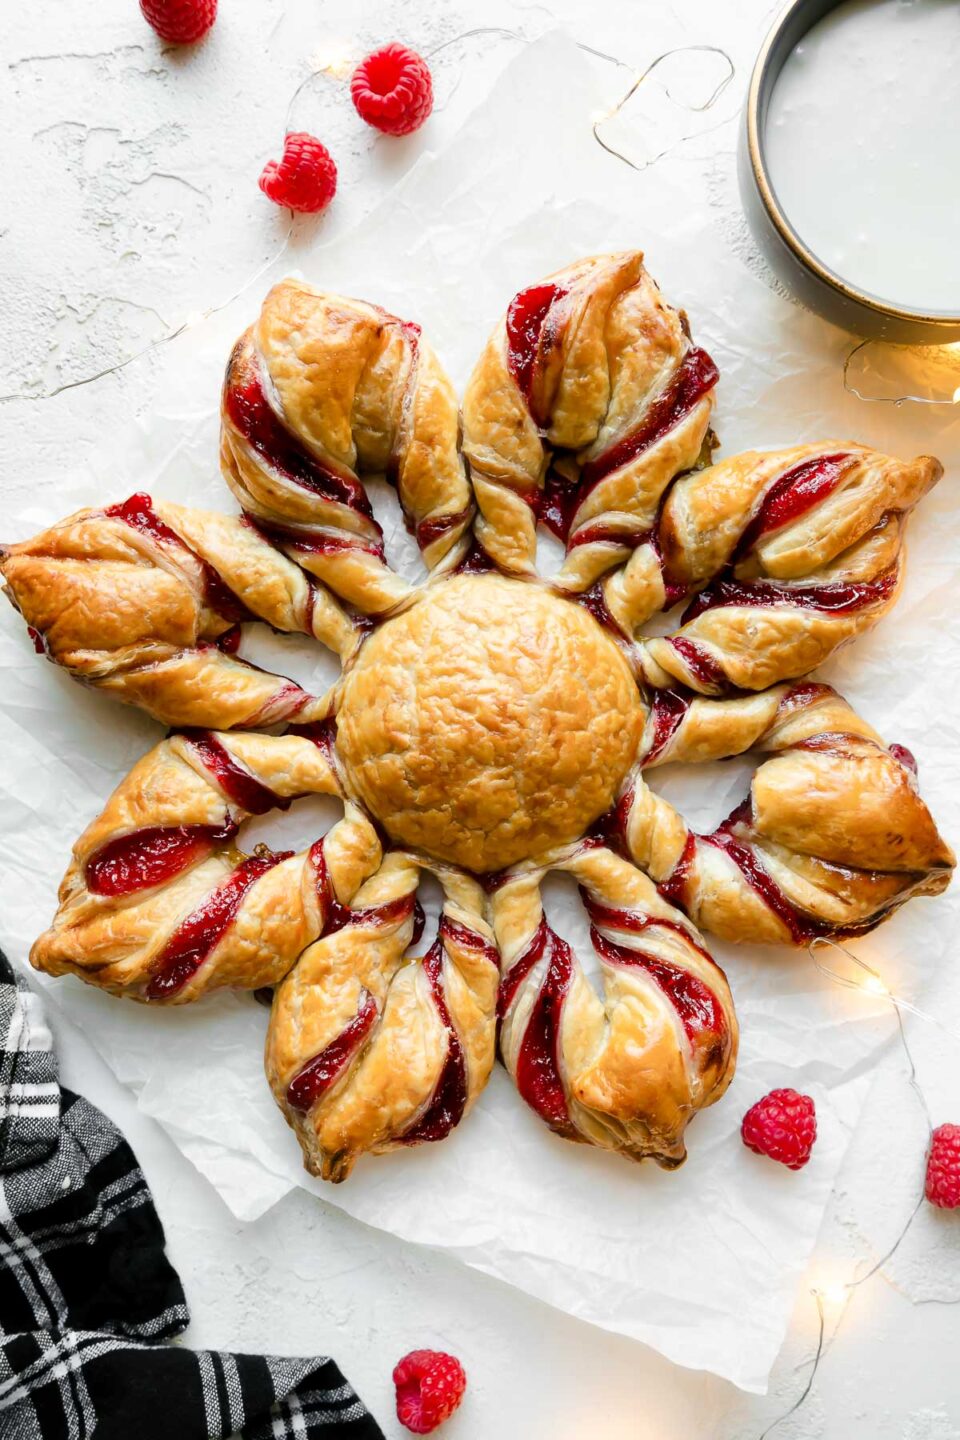 A baked Christmas Kringle puff pastry star sits atop a couple sheets of crinkled parchment paper. The parchment paper sits atop a creamy white textured surface. A small bowl filled with icing rests alongside the puff pastry star with loose fresh raspberries, twinkling lights, and a black and white plaid linen napkin surround the puff pastry star.